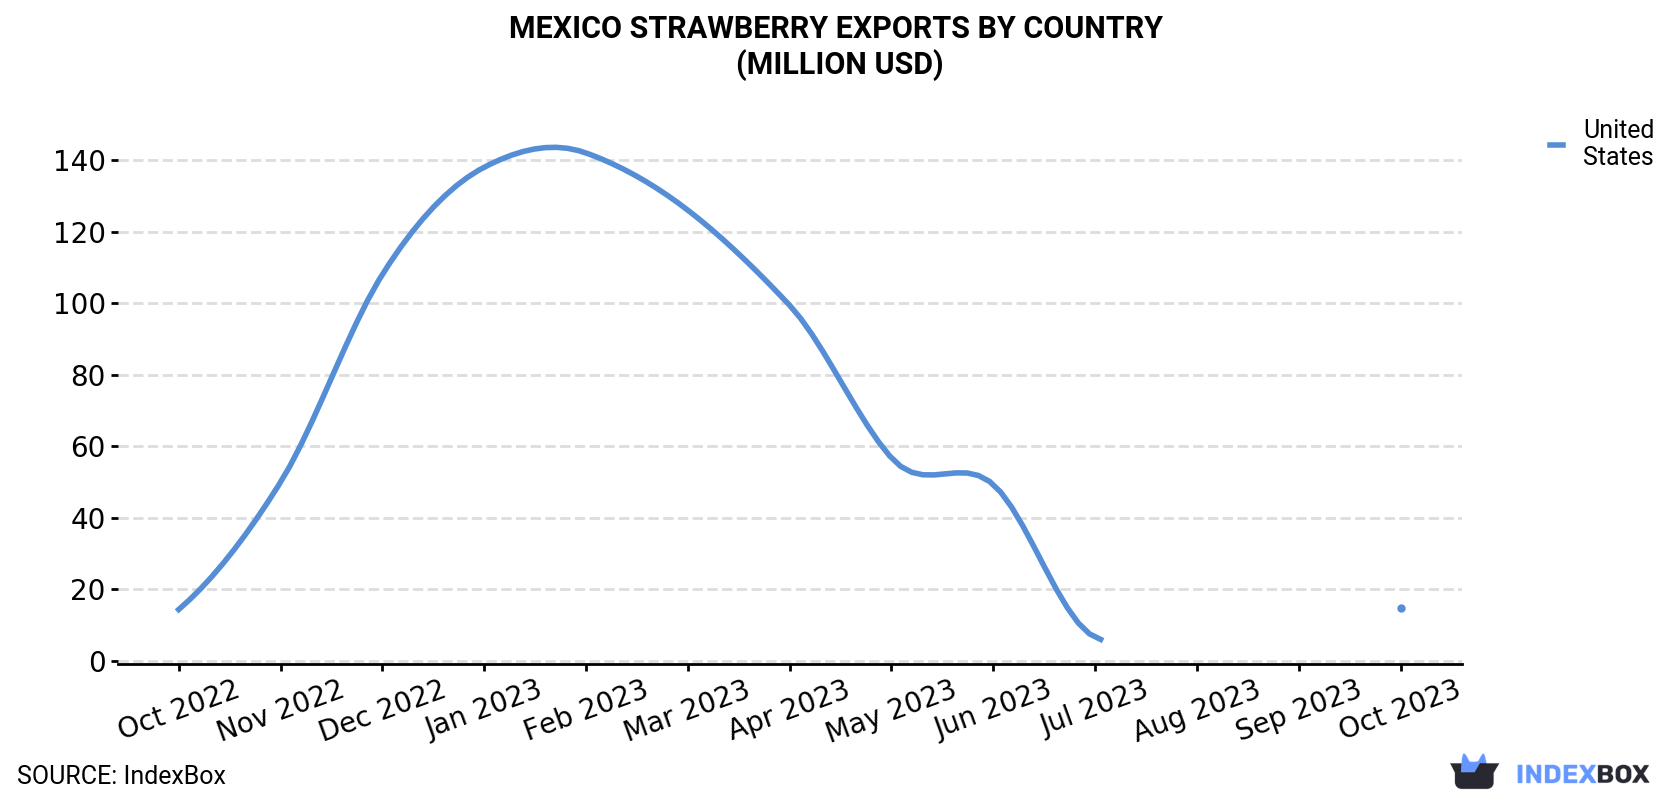 Mexico Strawberry Exports By Country (Million USD)